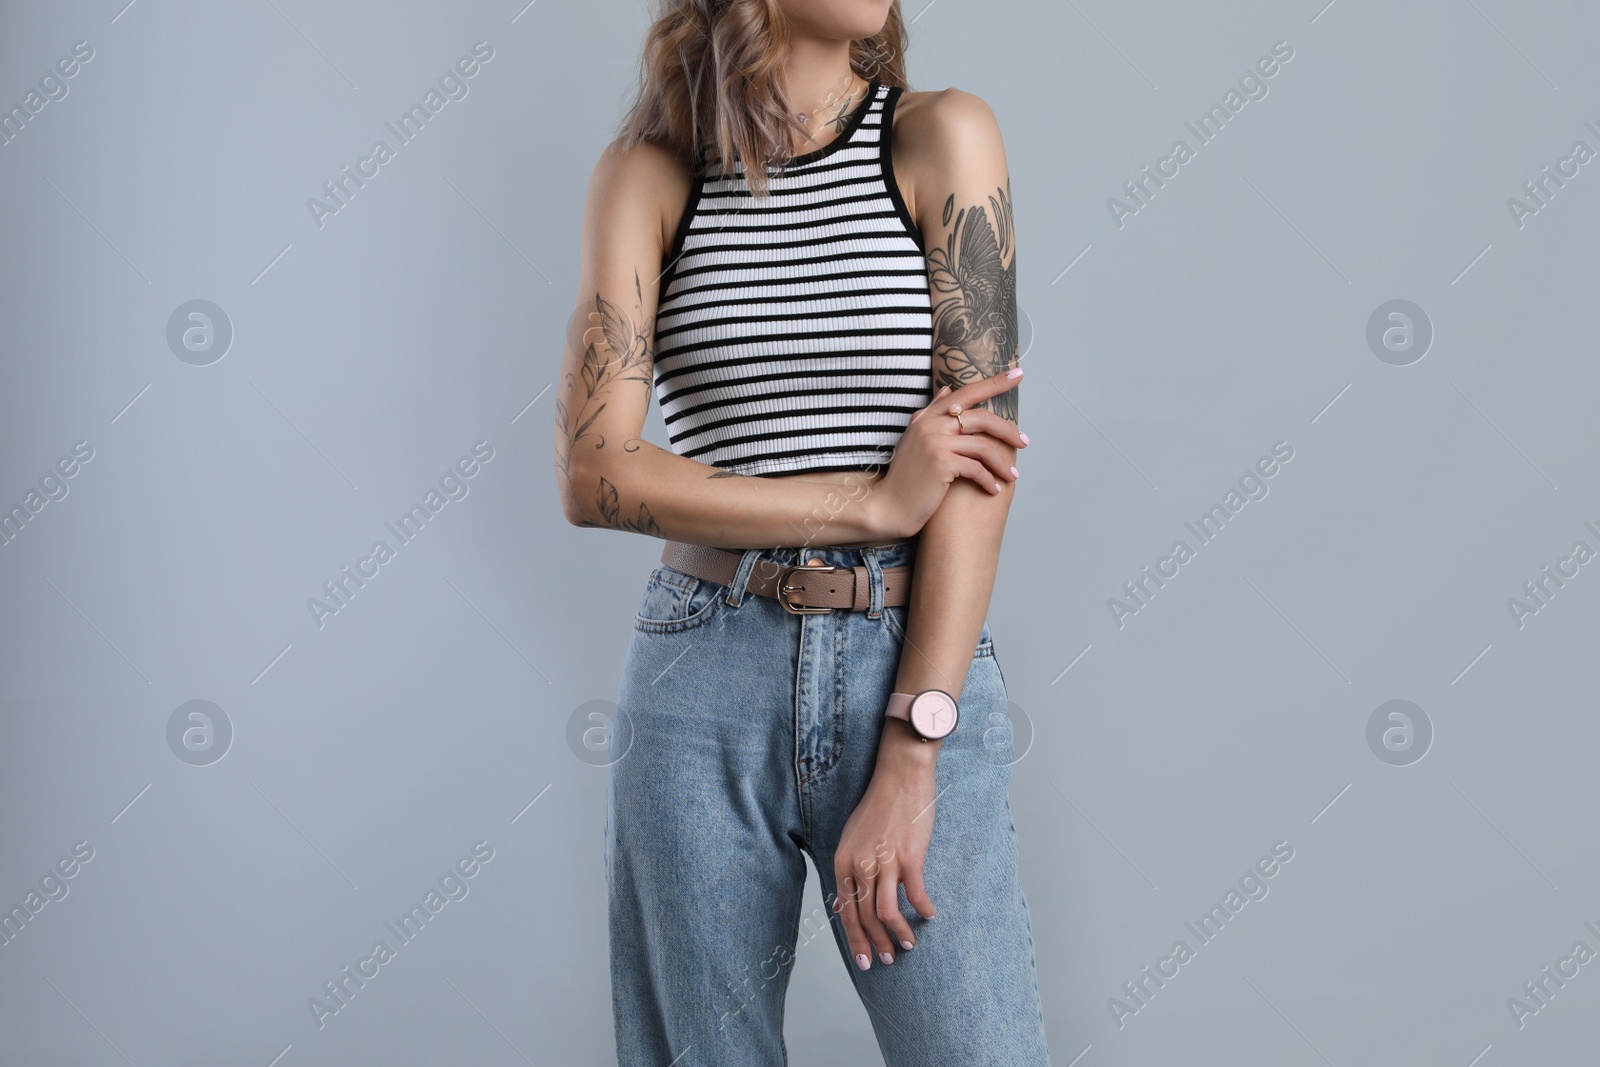 Photo of Beautiful woman with tattoos on body against grey background, closeup